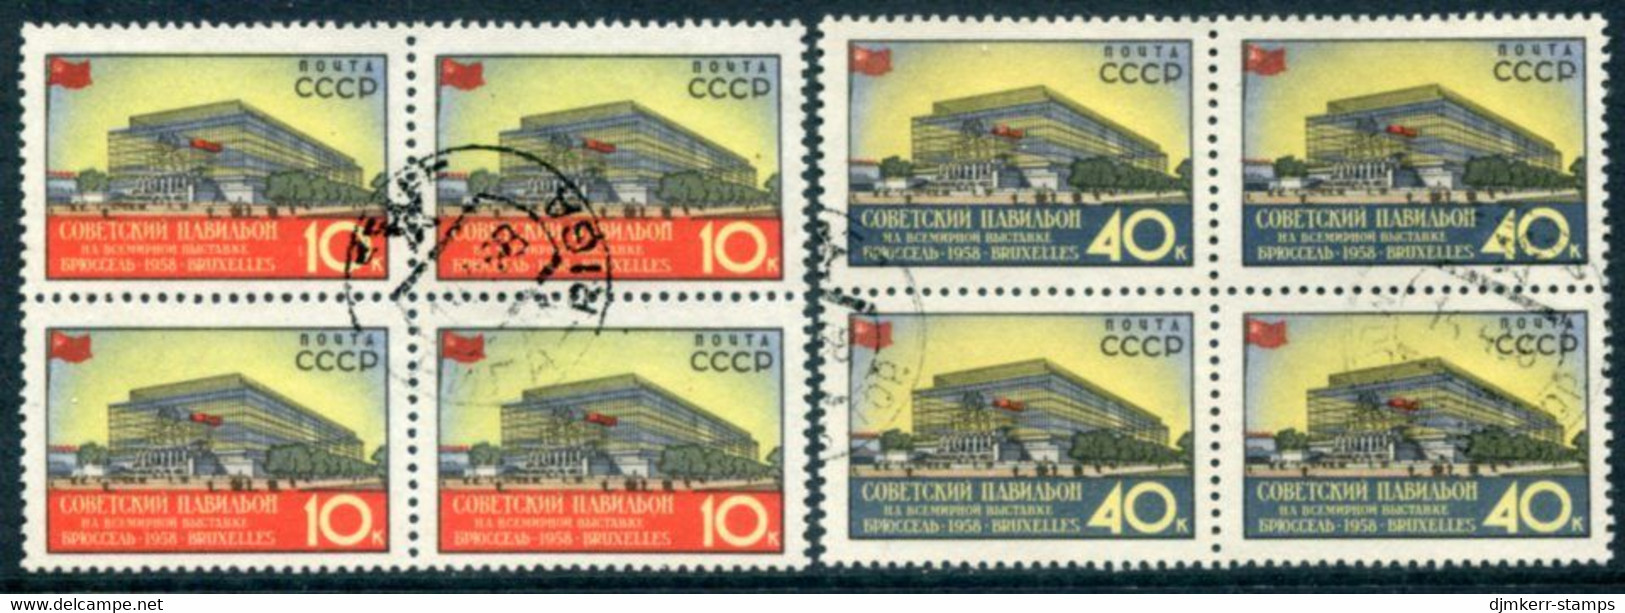 SOVIET UNION 1958 World Exhibition Perforated Blocks Of 4 Used .  Michel 2068-69 A - Usados